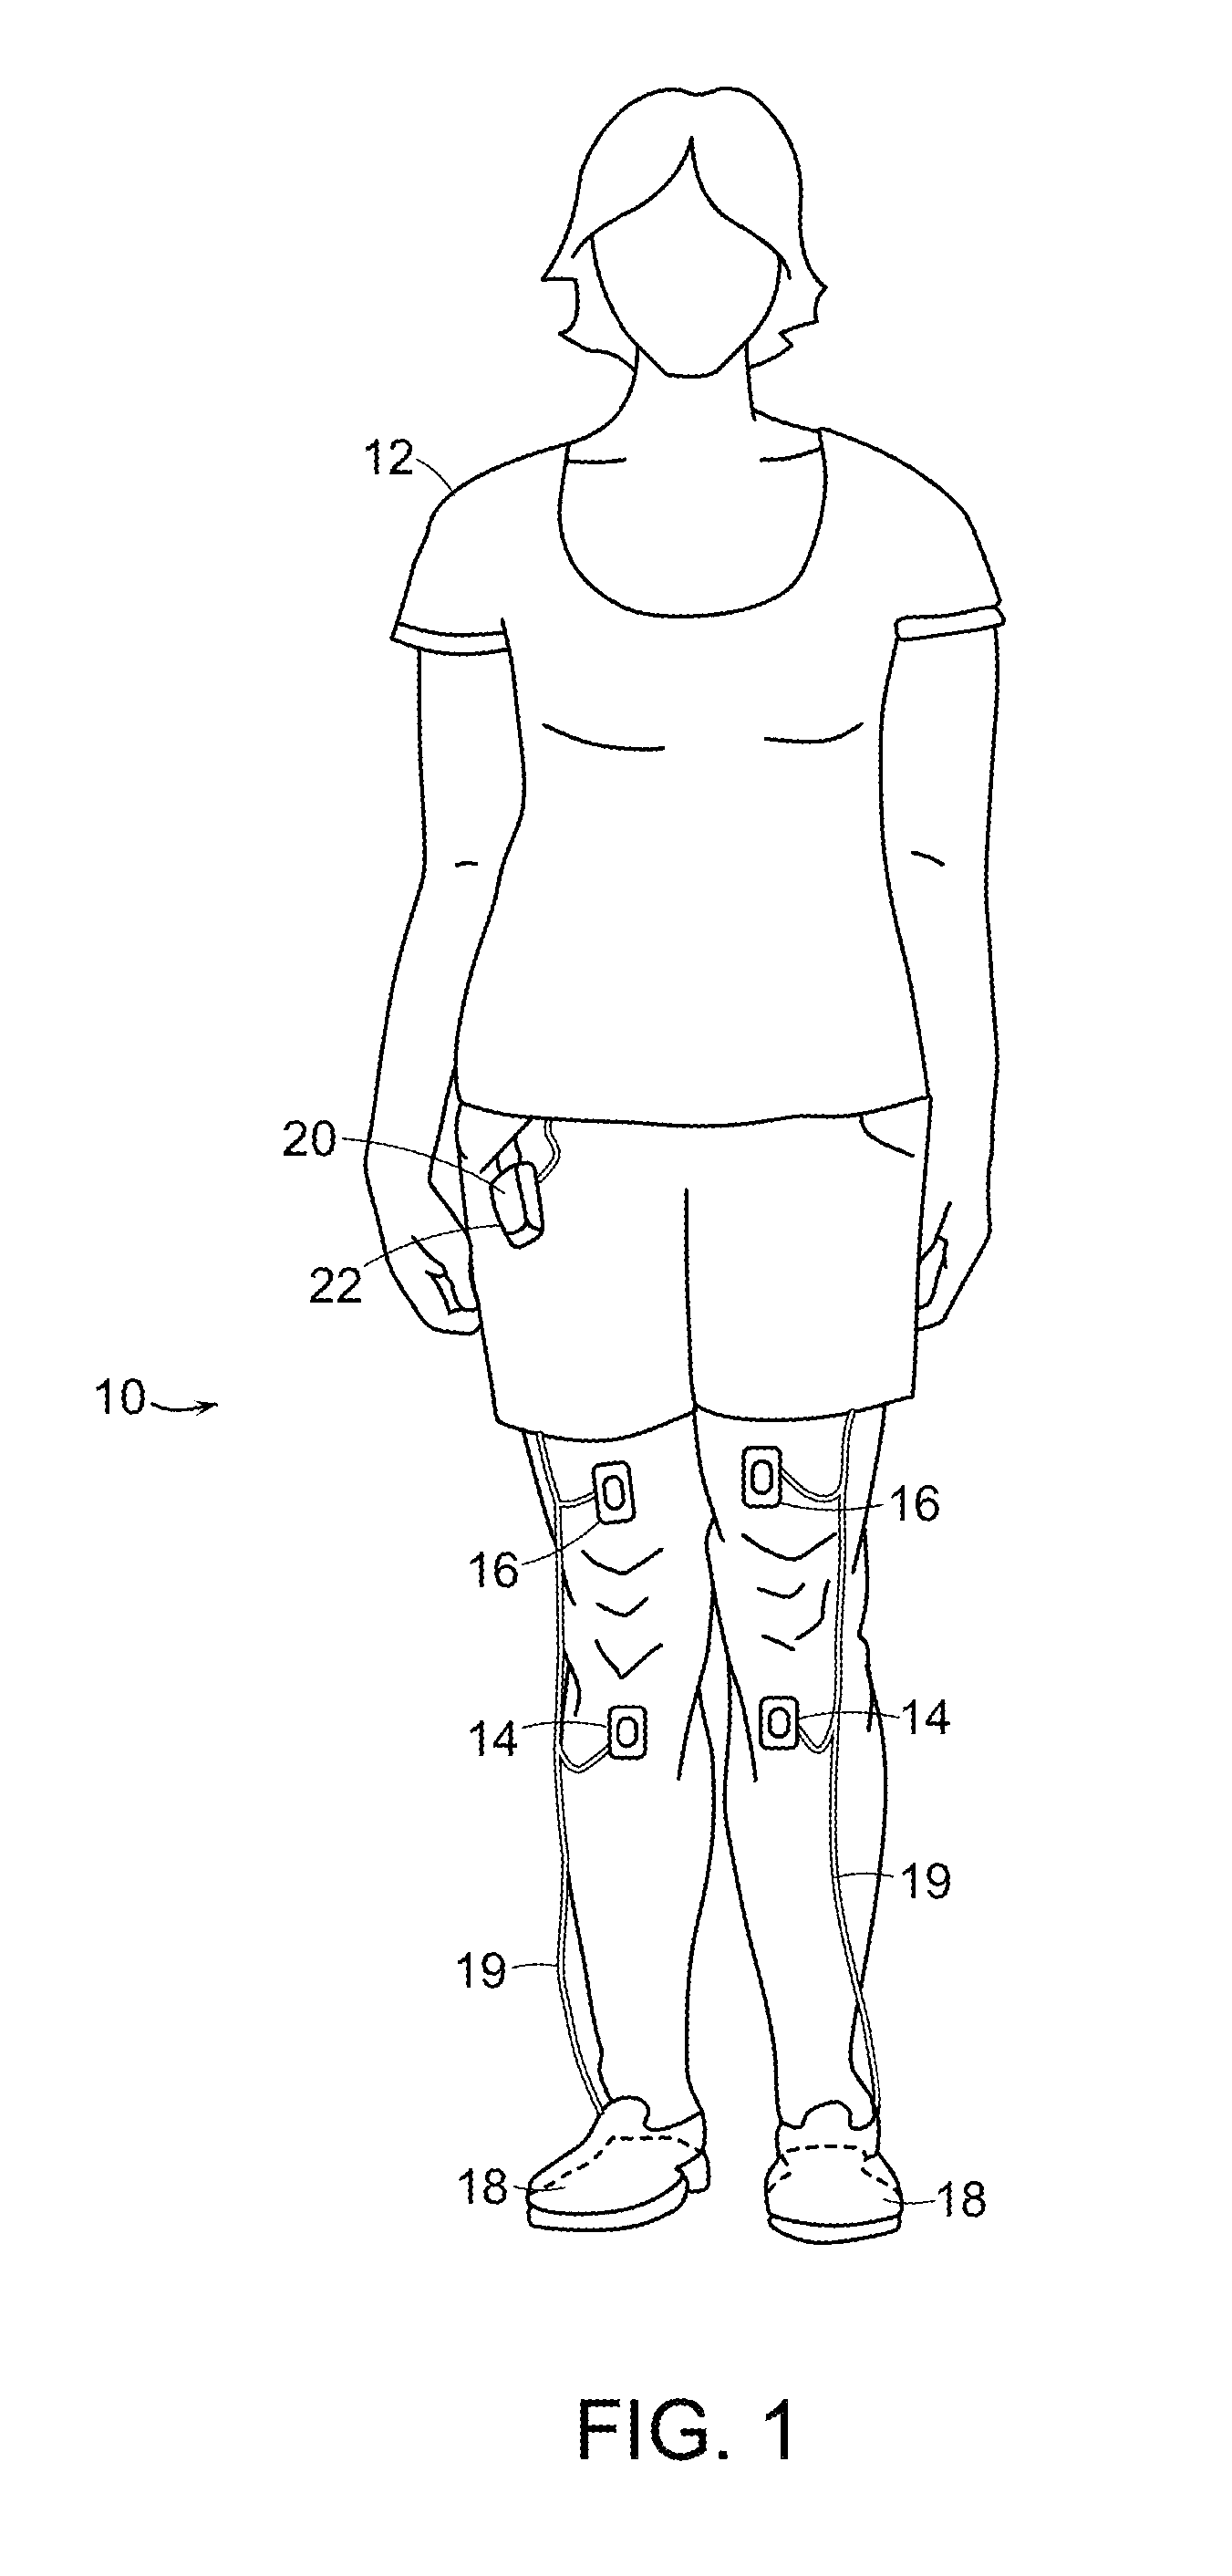 Feedback Method And Wearable Device To Monitor And Modulate Knee Adduction Moment